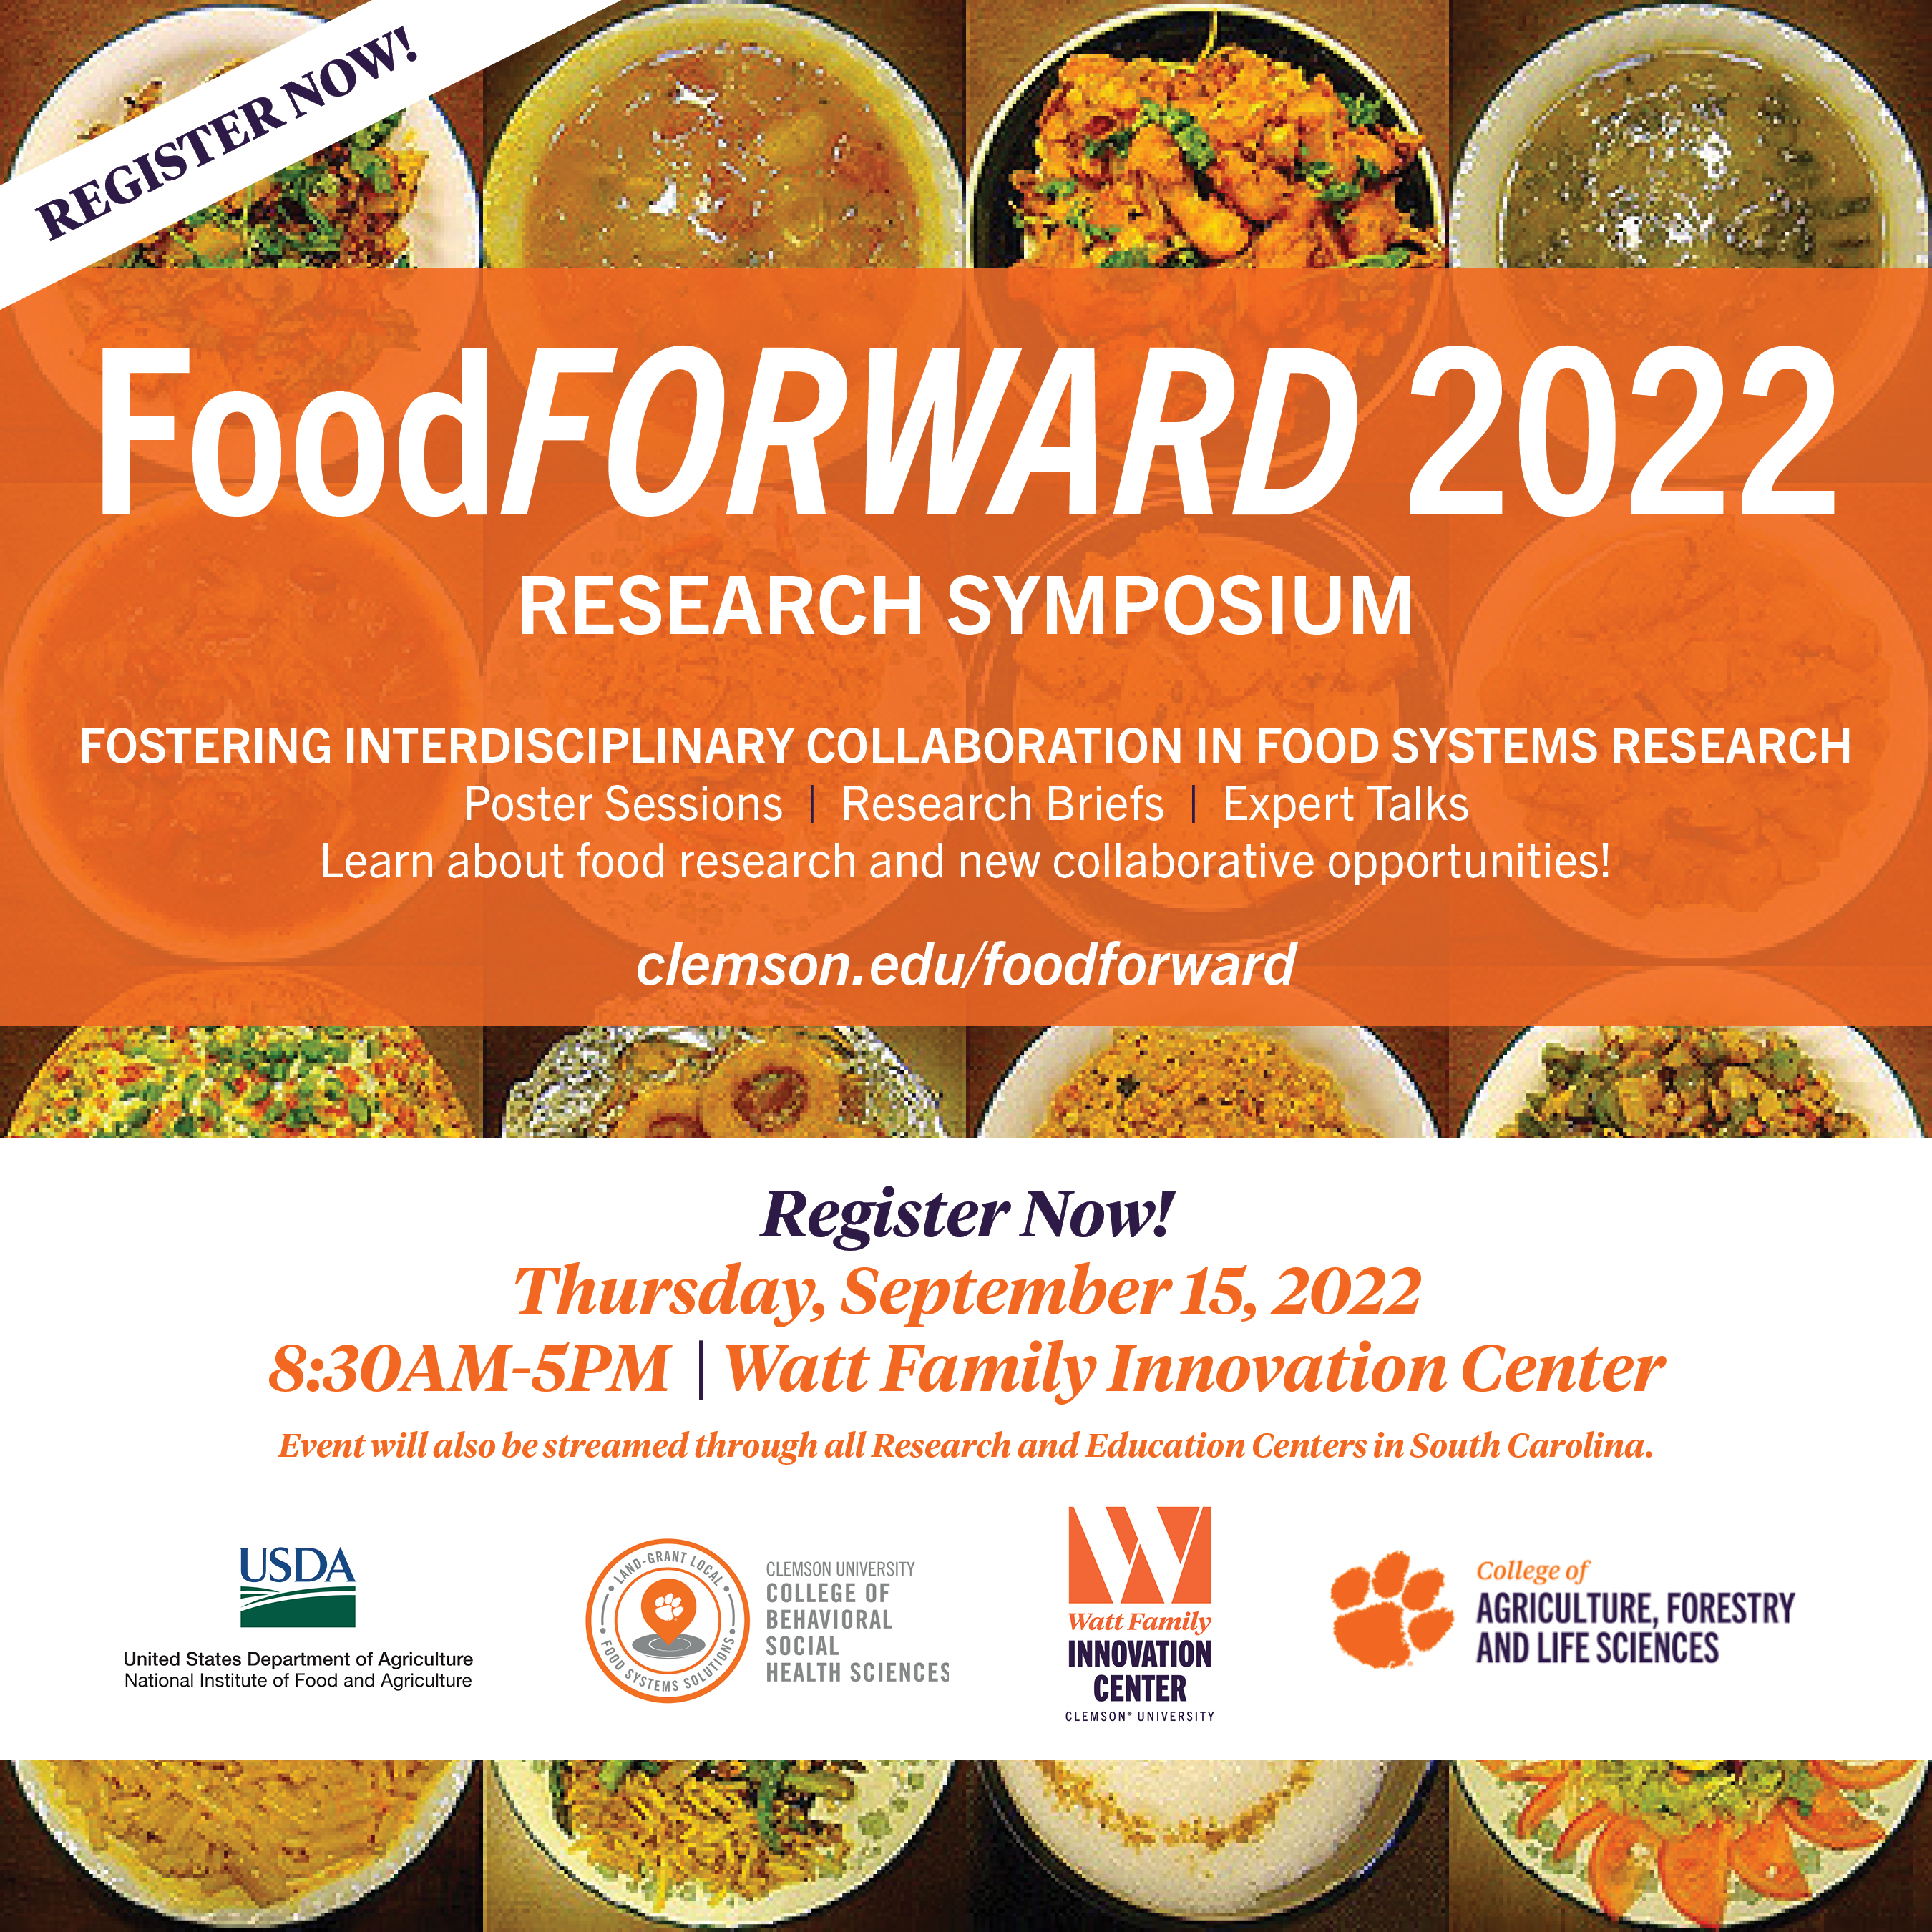 Food Forward 2022 Research Symposium: The 21st-century land-grant food systems approach to collaborative research. Friday, March 11, 2022, 8:30am-5pm at the Watt Family Innovation Center. Event will also be streamed through all research and education centers in South Carolina.